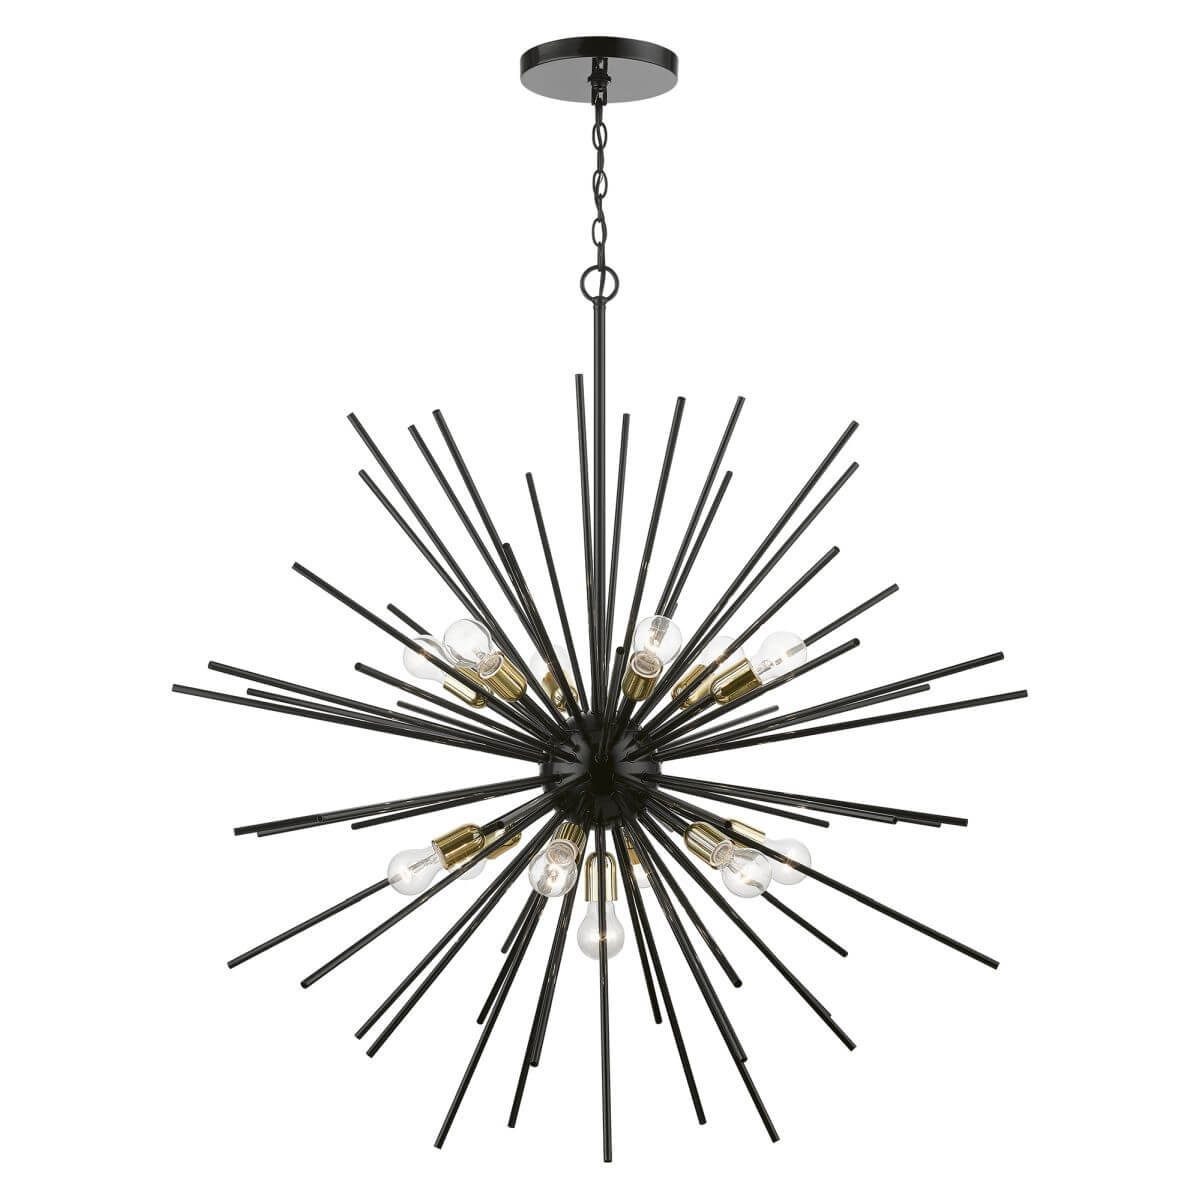 13 Light 44 inch Foyer Chandelier in Shiny Black-Polished Brass Accents with Iron Pipe Rods - 245234